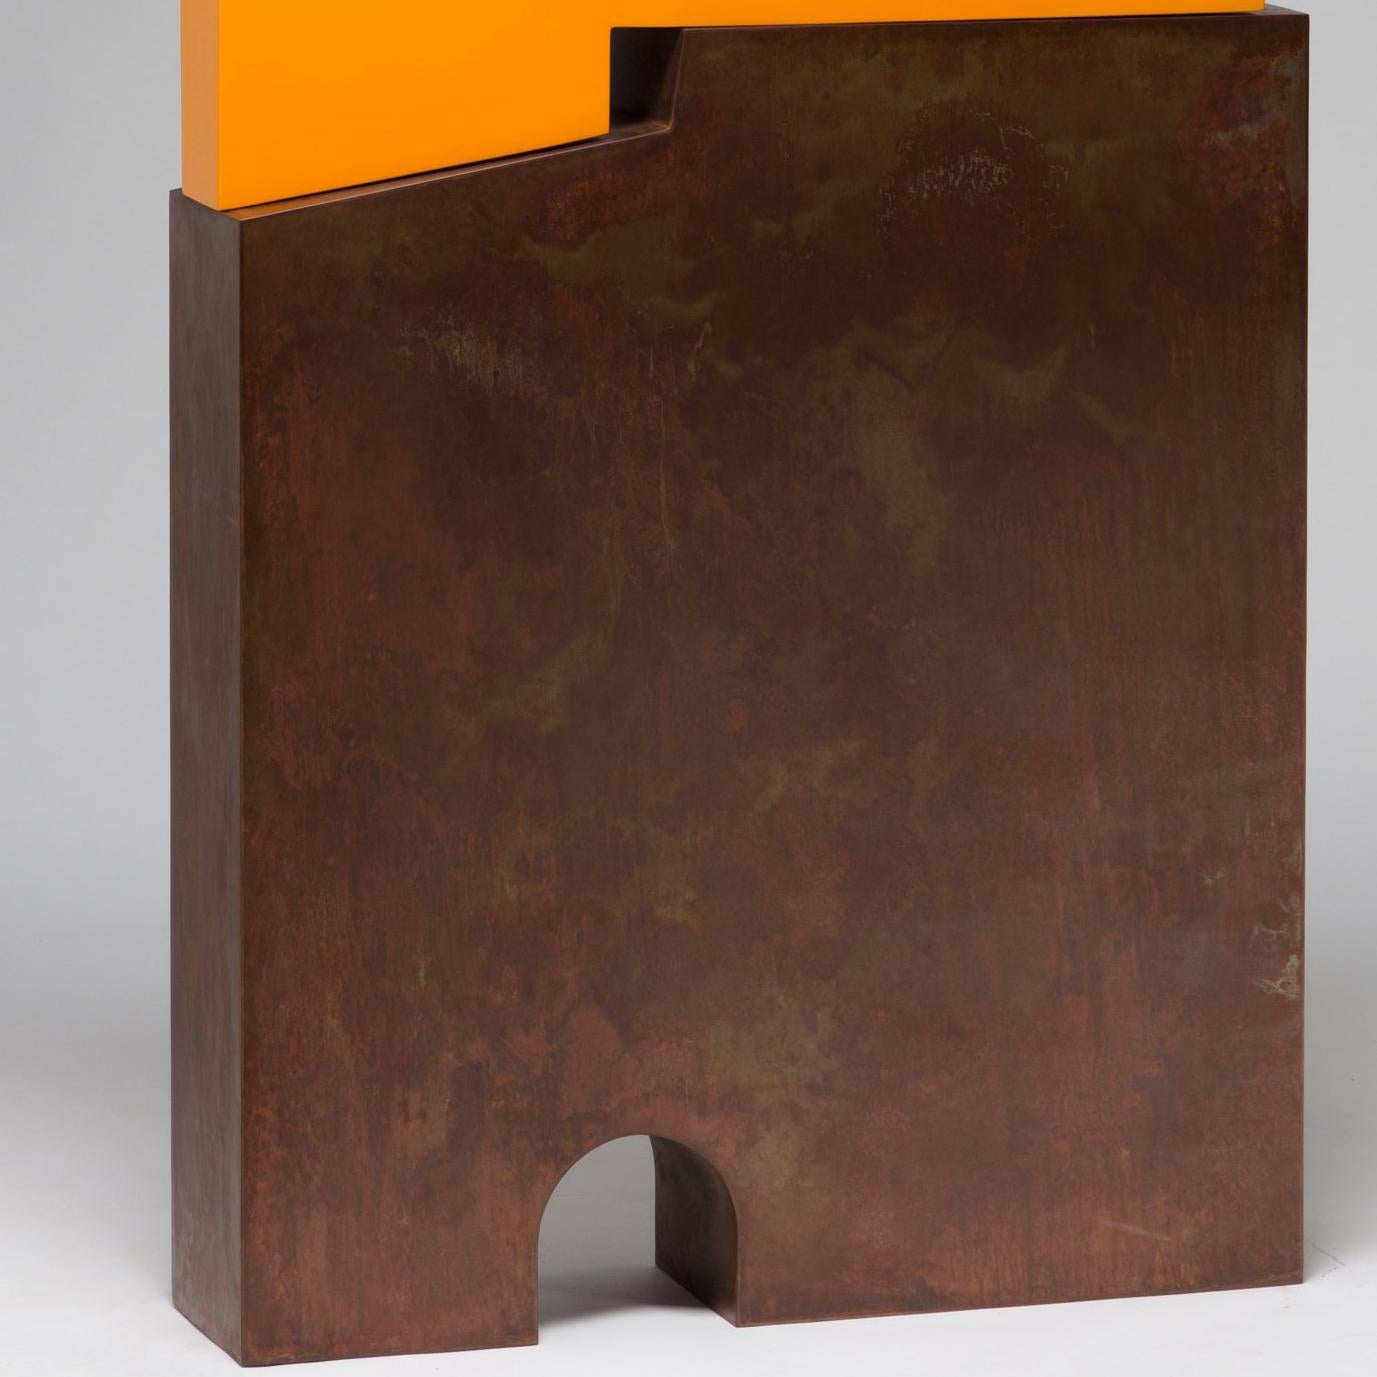 Tall outside sculpture, geometric abstract steel sculpture, steel orange - Abstract Sculpture by Pascal Pierme